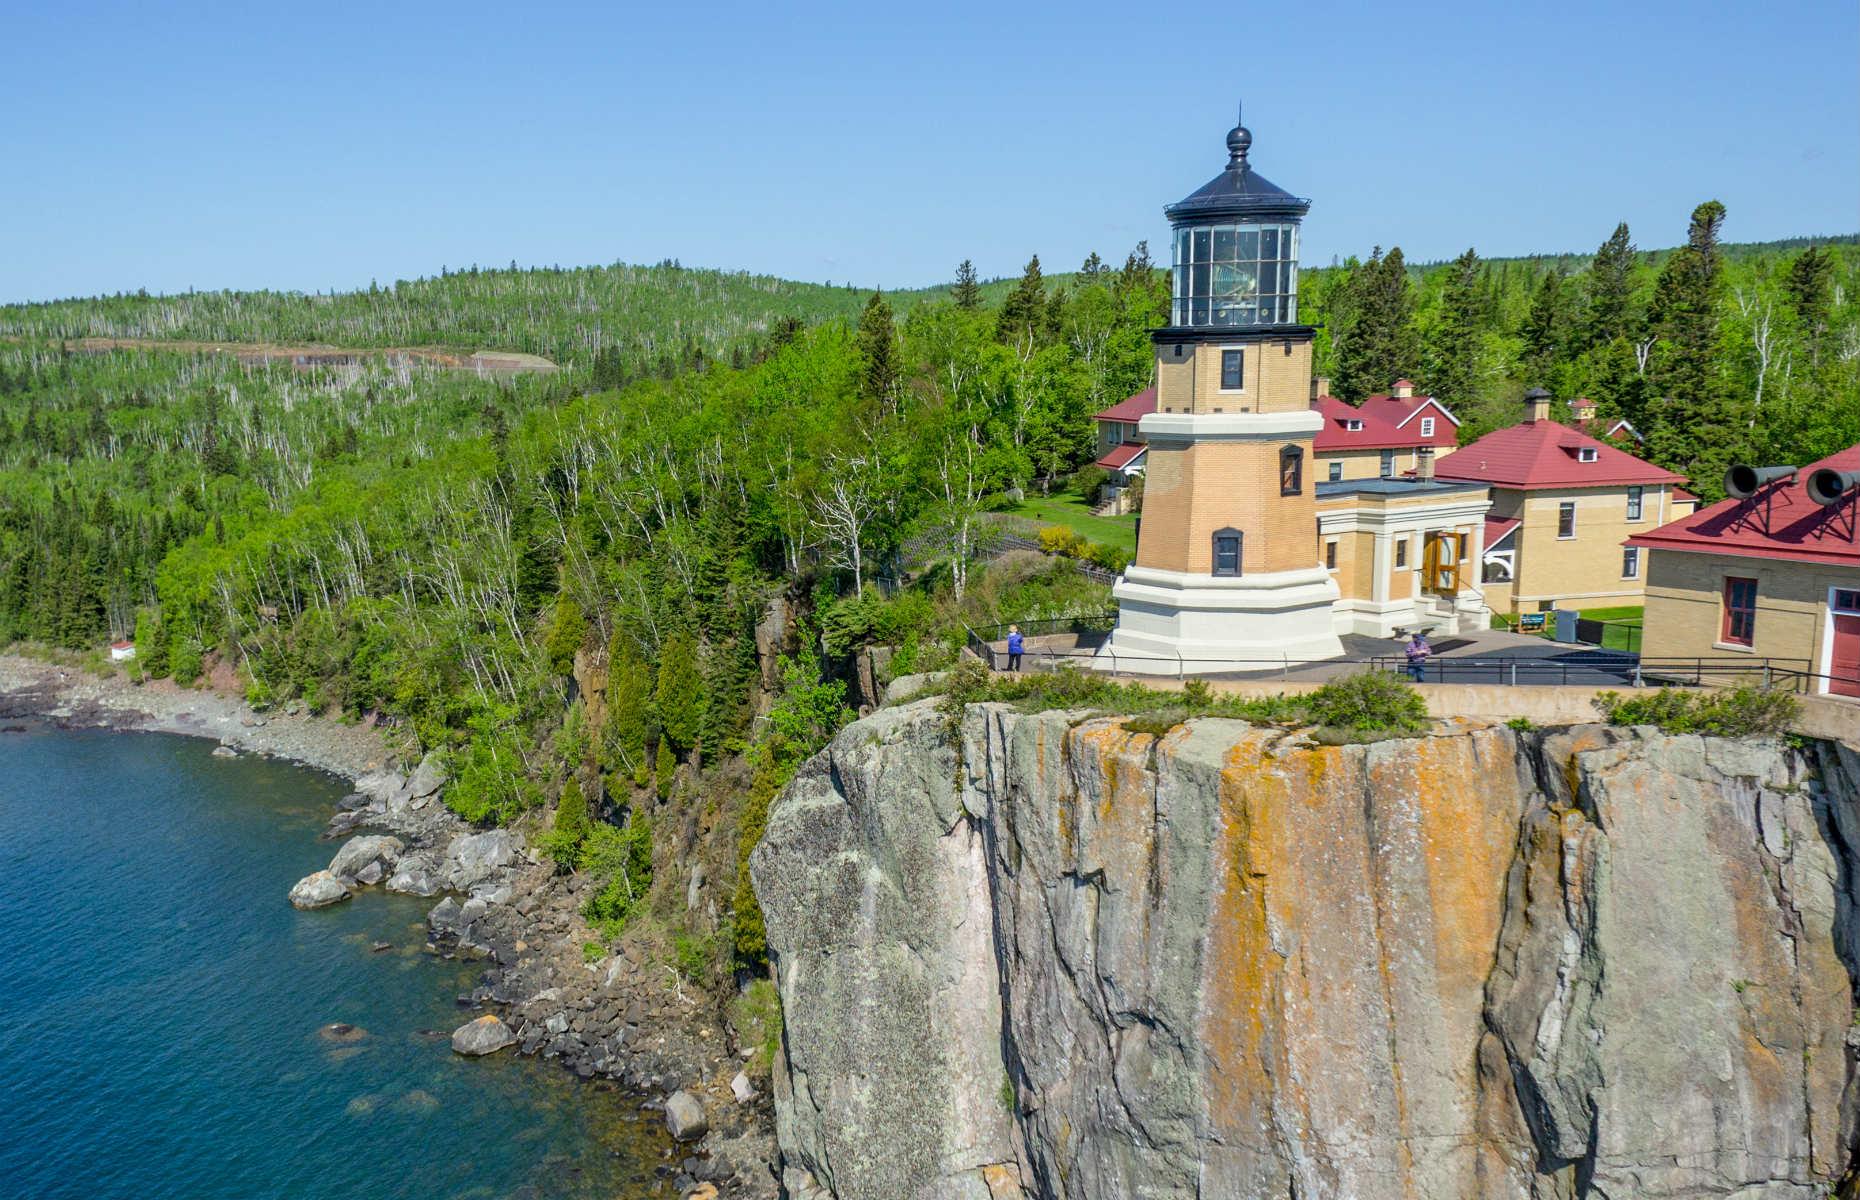 <p>One of America’s prettiest lighthouses, the red-brick Split Rock is located southwest of Silver Bay on the North Shore of Lake Superior. The 54-foot (16.5m) tower was first lit in 1910 and was built after many maritime tragedies on the lake, culminating in the perilous gale of November 1905, when 18 ships were sunk or badly damaged in two days. Situated on towering cliffs and surrounded by its own state park with trails, waterways and campgrounds, the lighthouse is nothing short of majestic. </p>